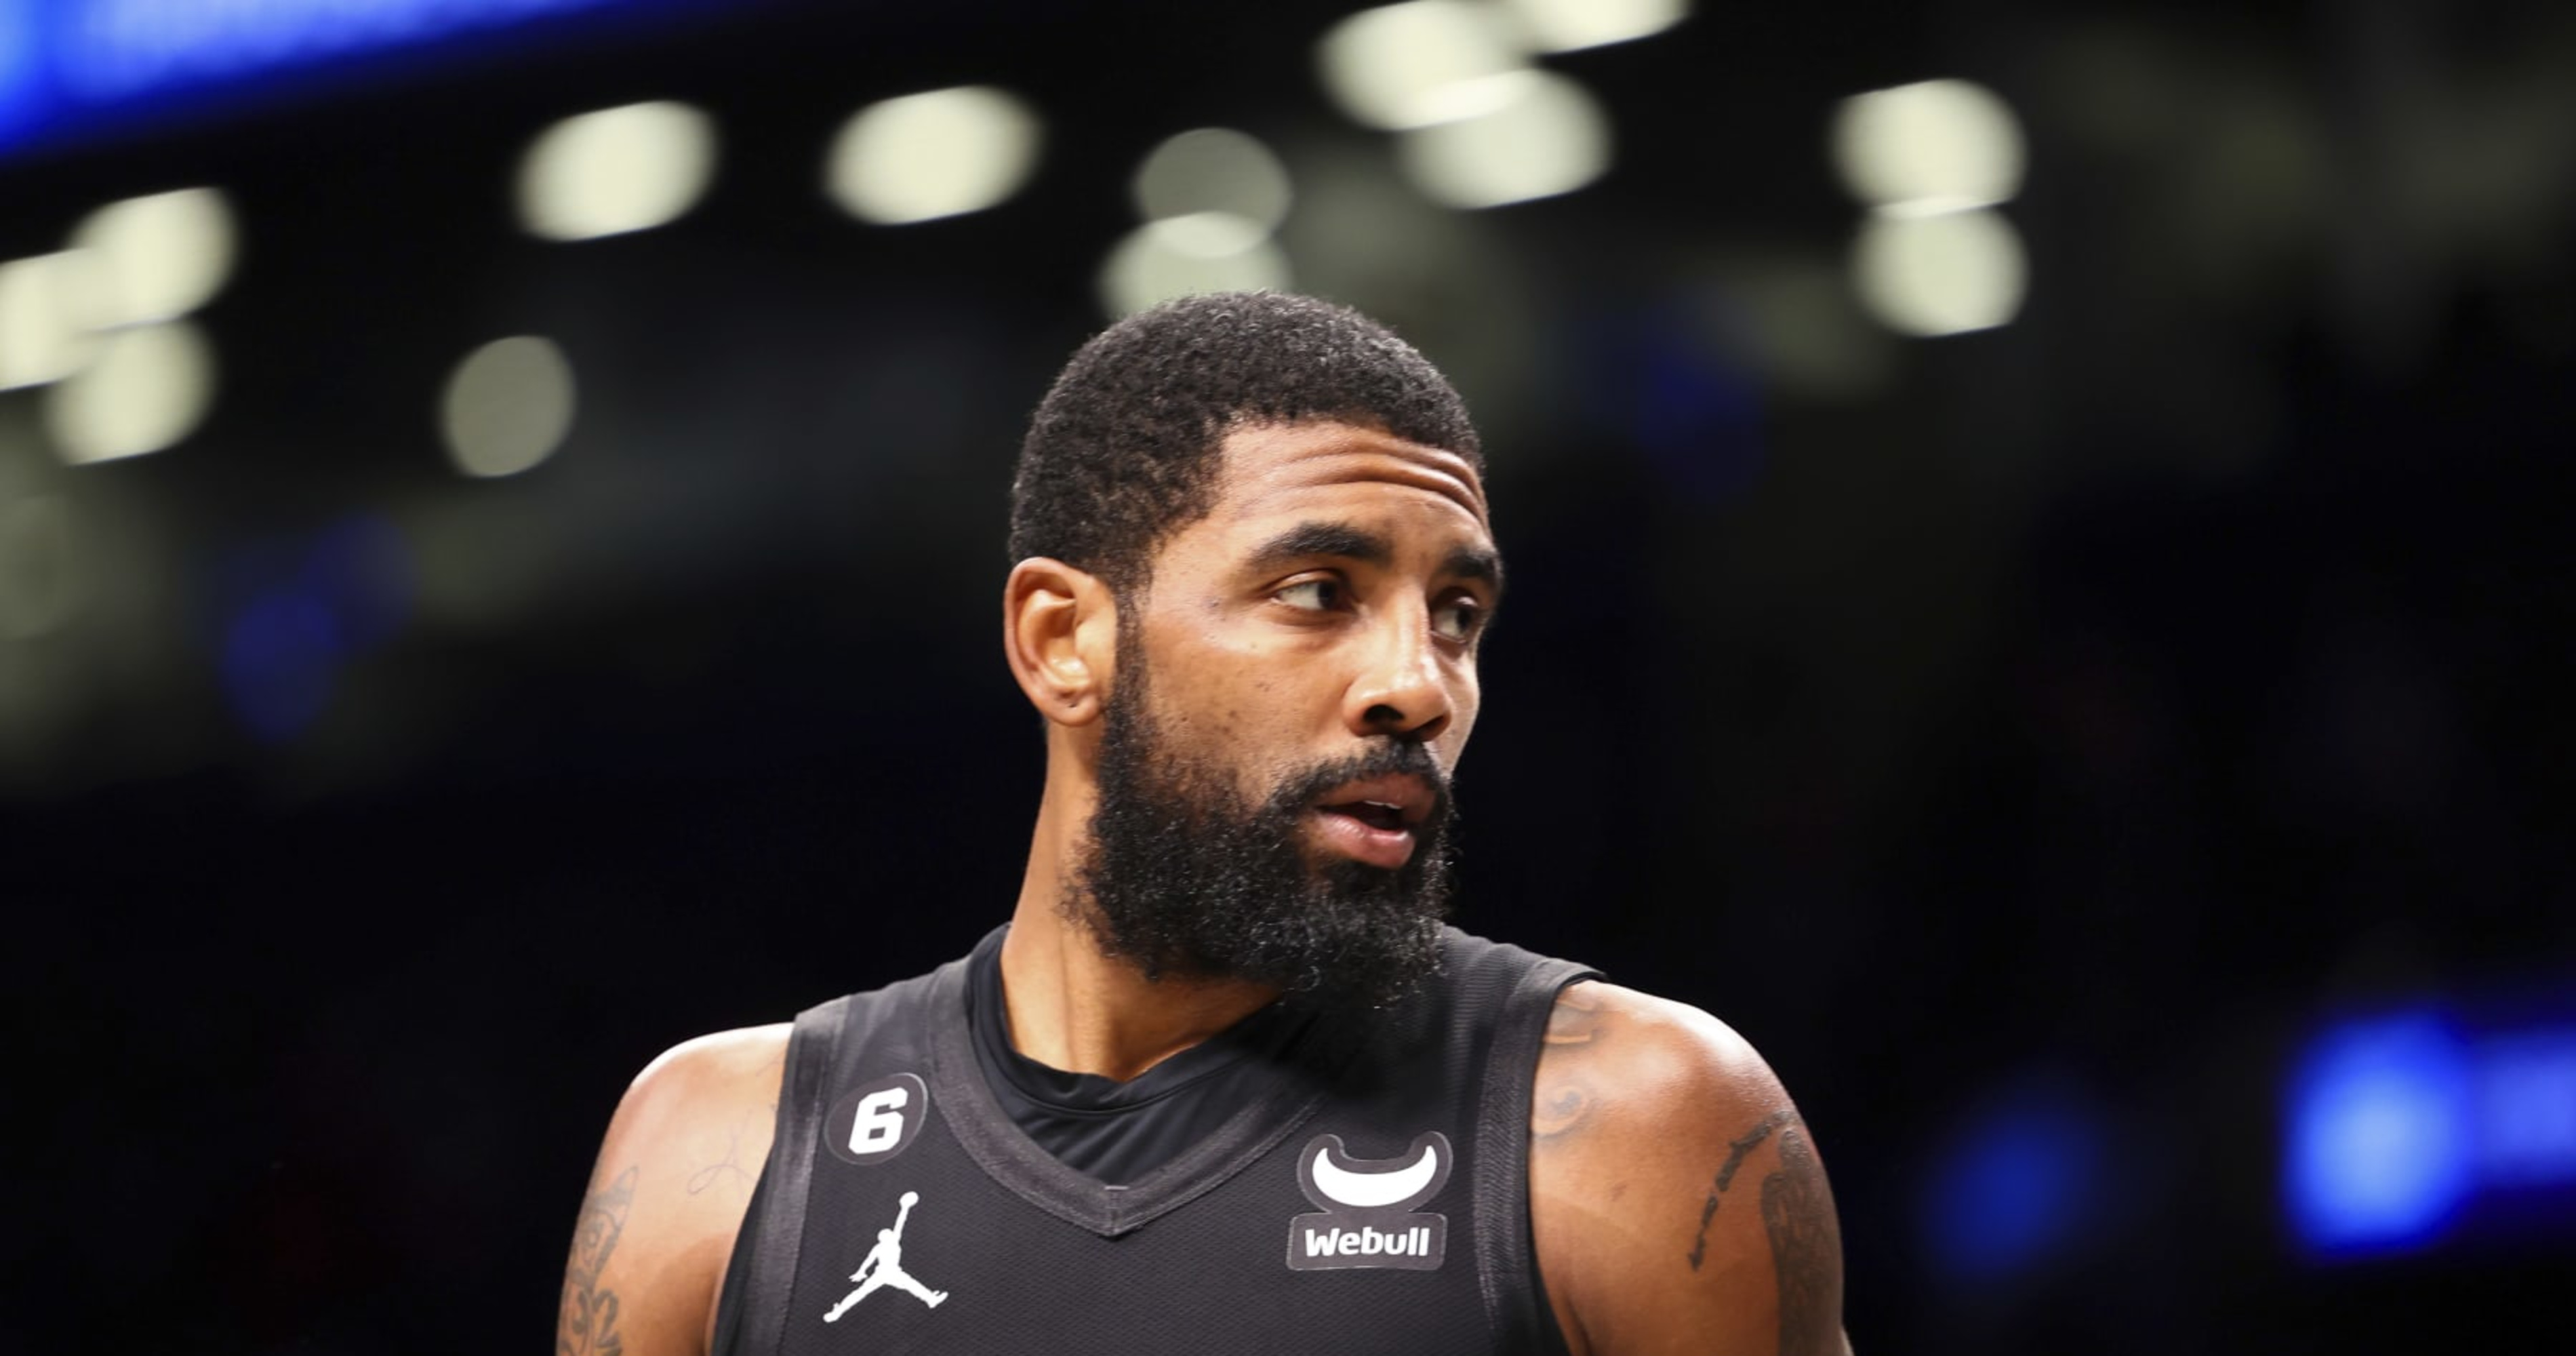 ADL Says It Can't Accept Kyrie Irving's $500K Donation 'in Good Conscience'